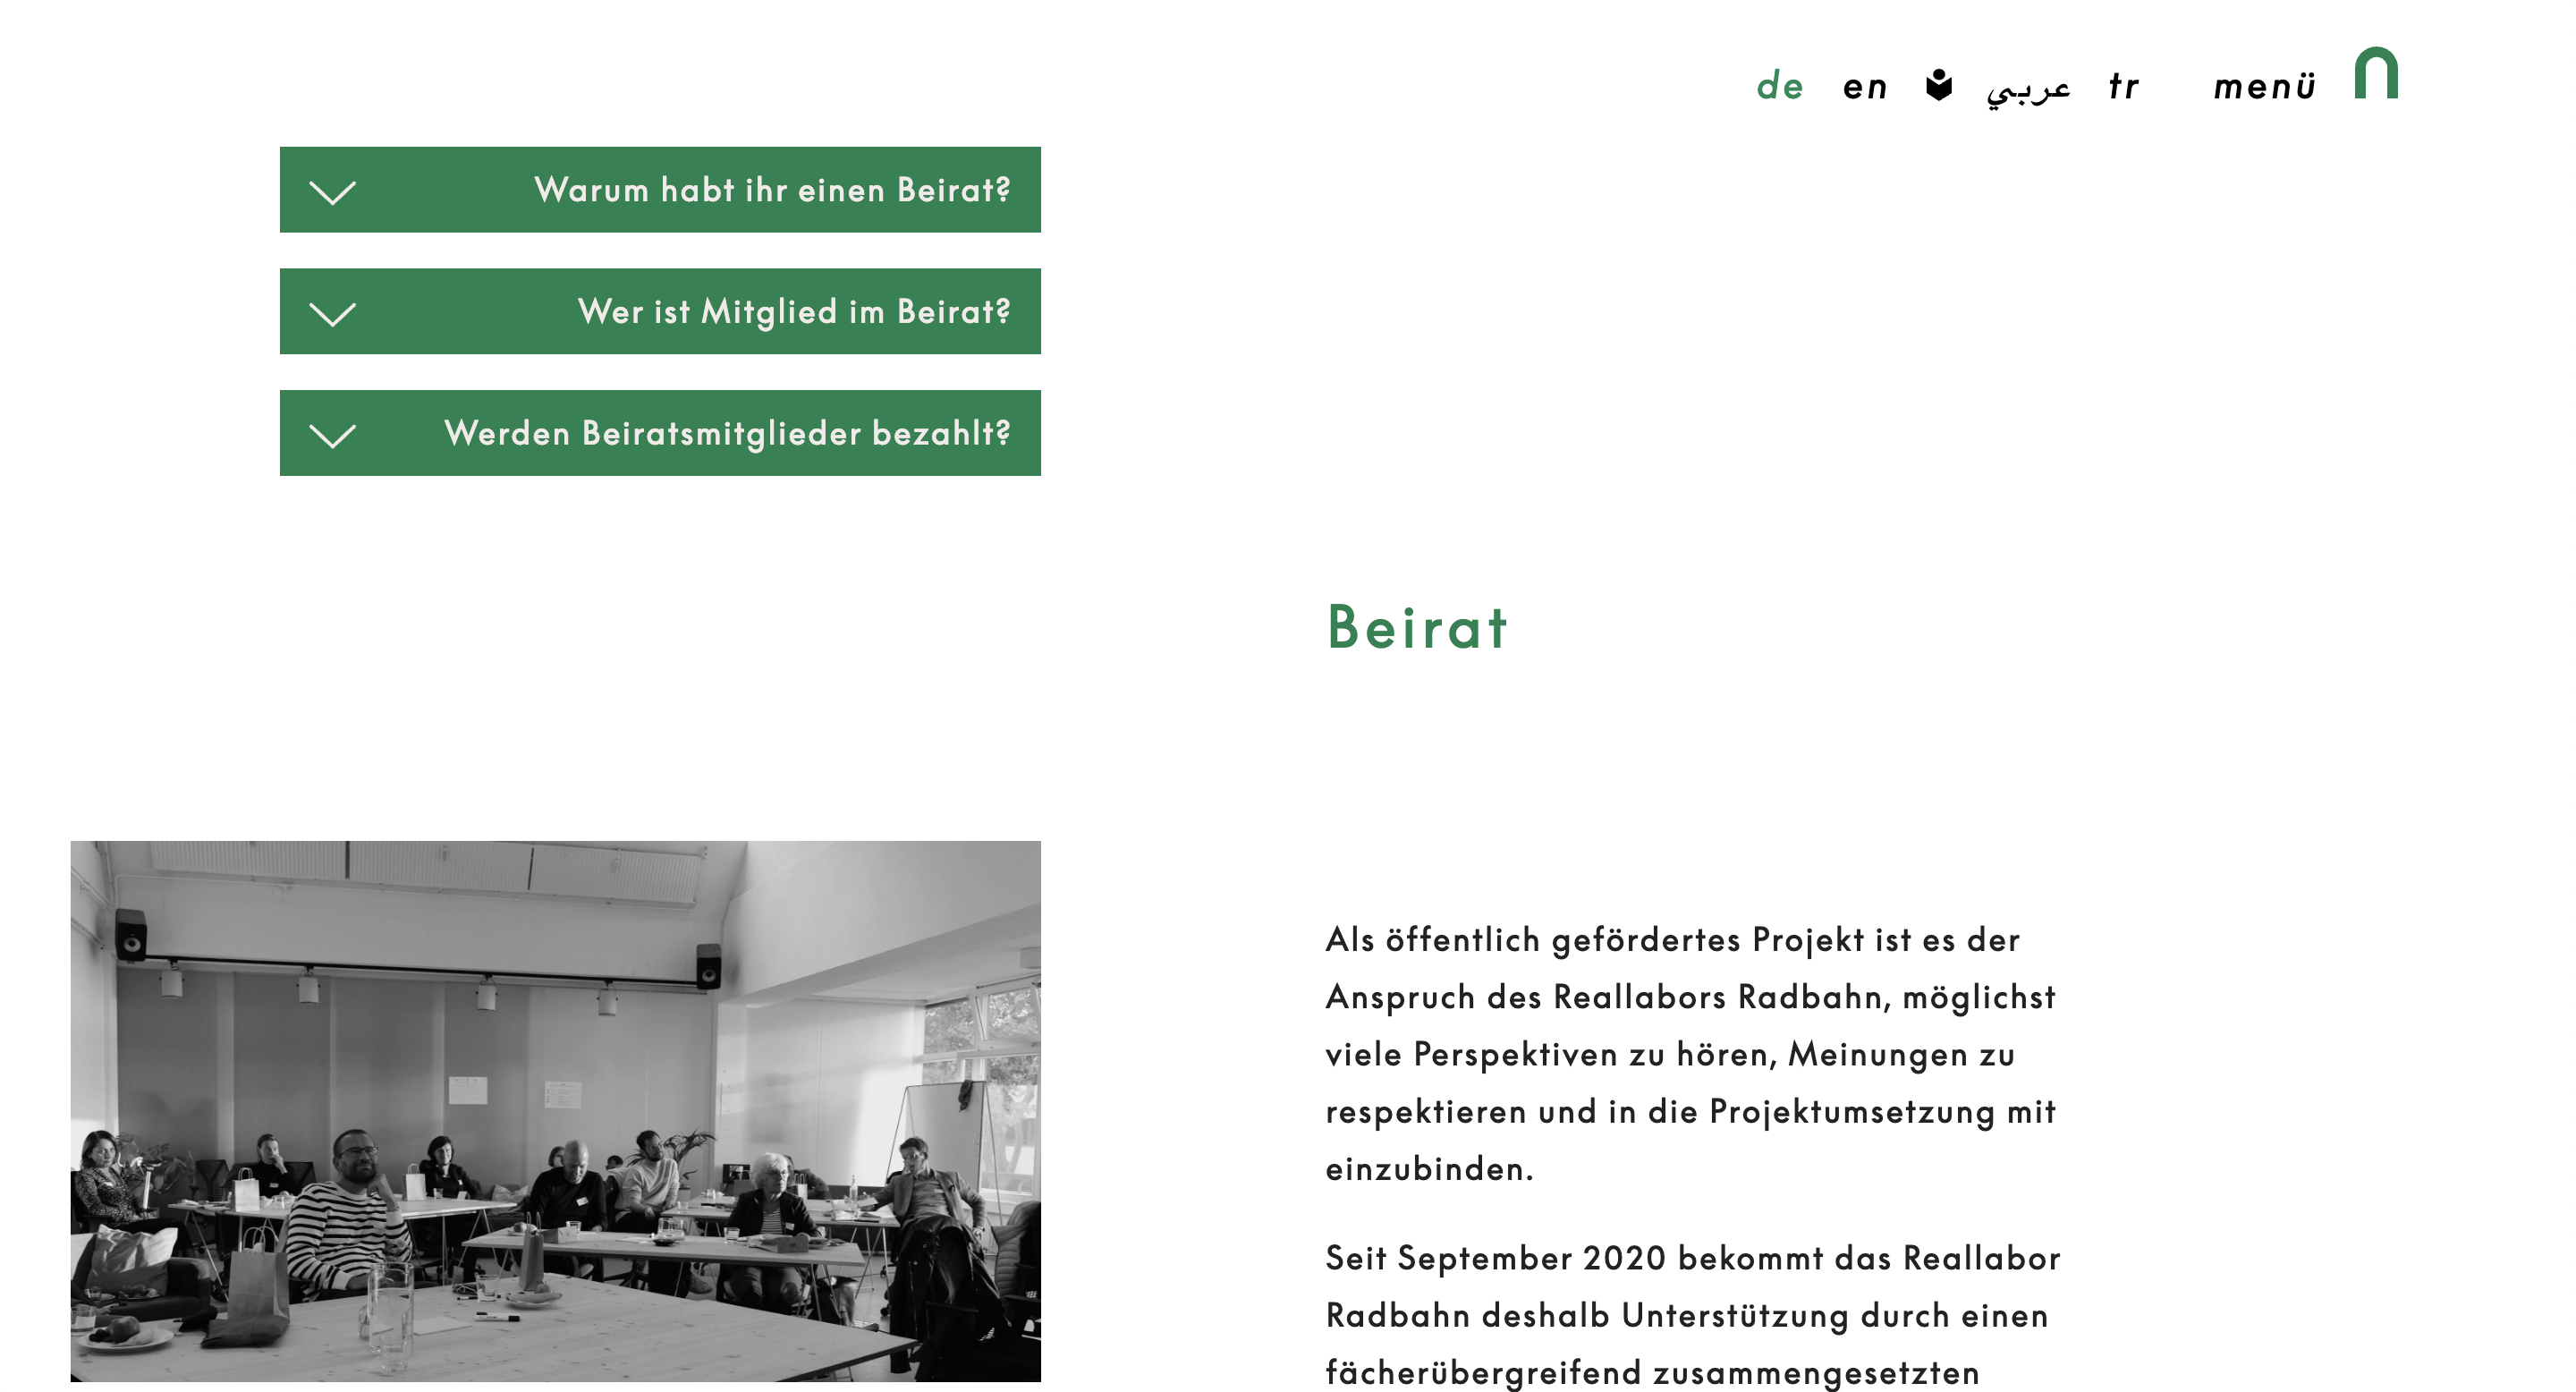 The start of a content page on white background with a black and white foto, a headline in green, some text and three accordions containing questions on the top left.